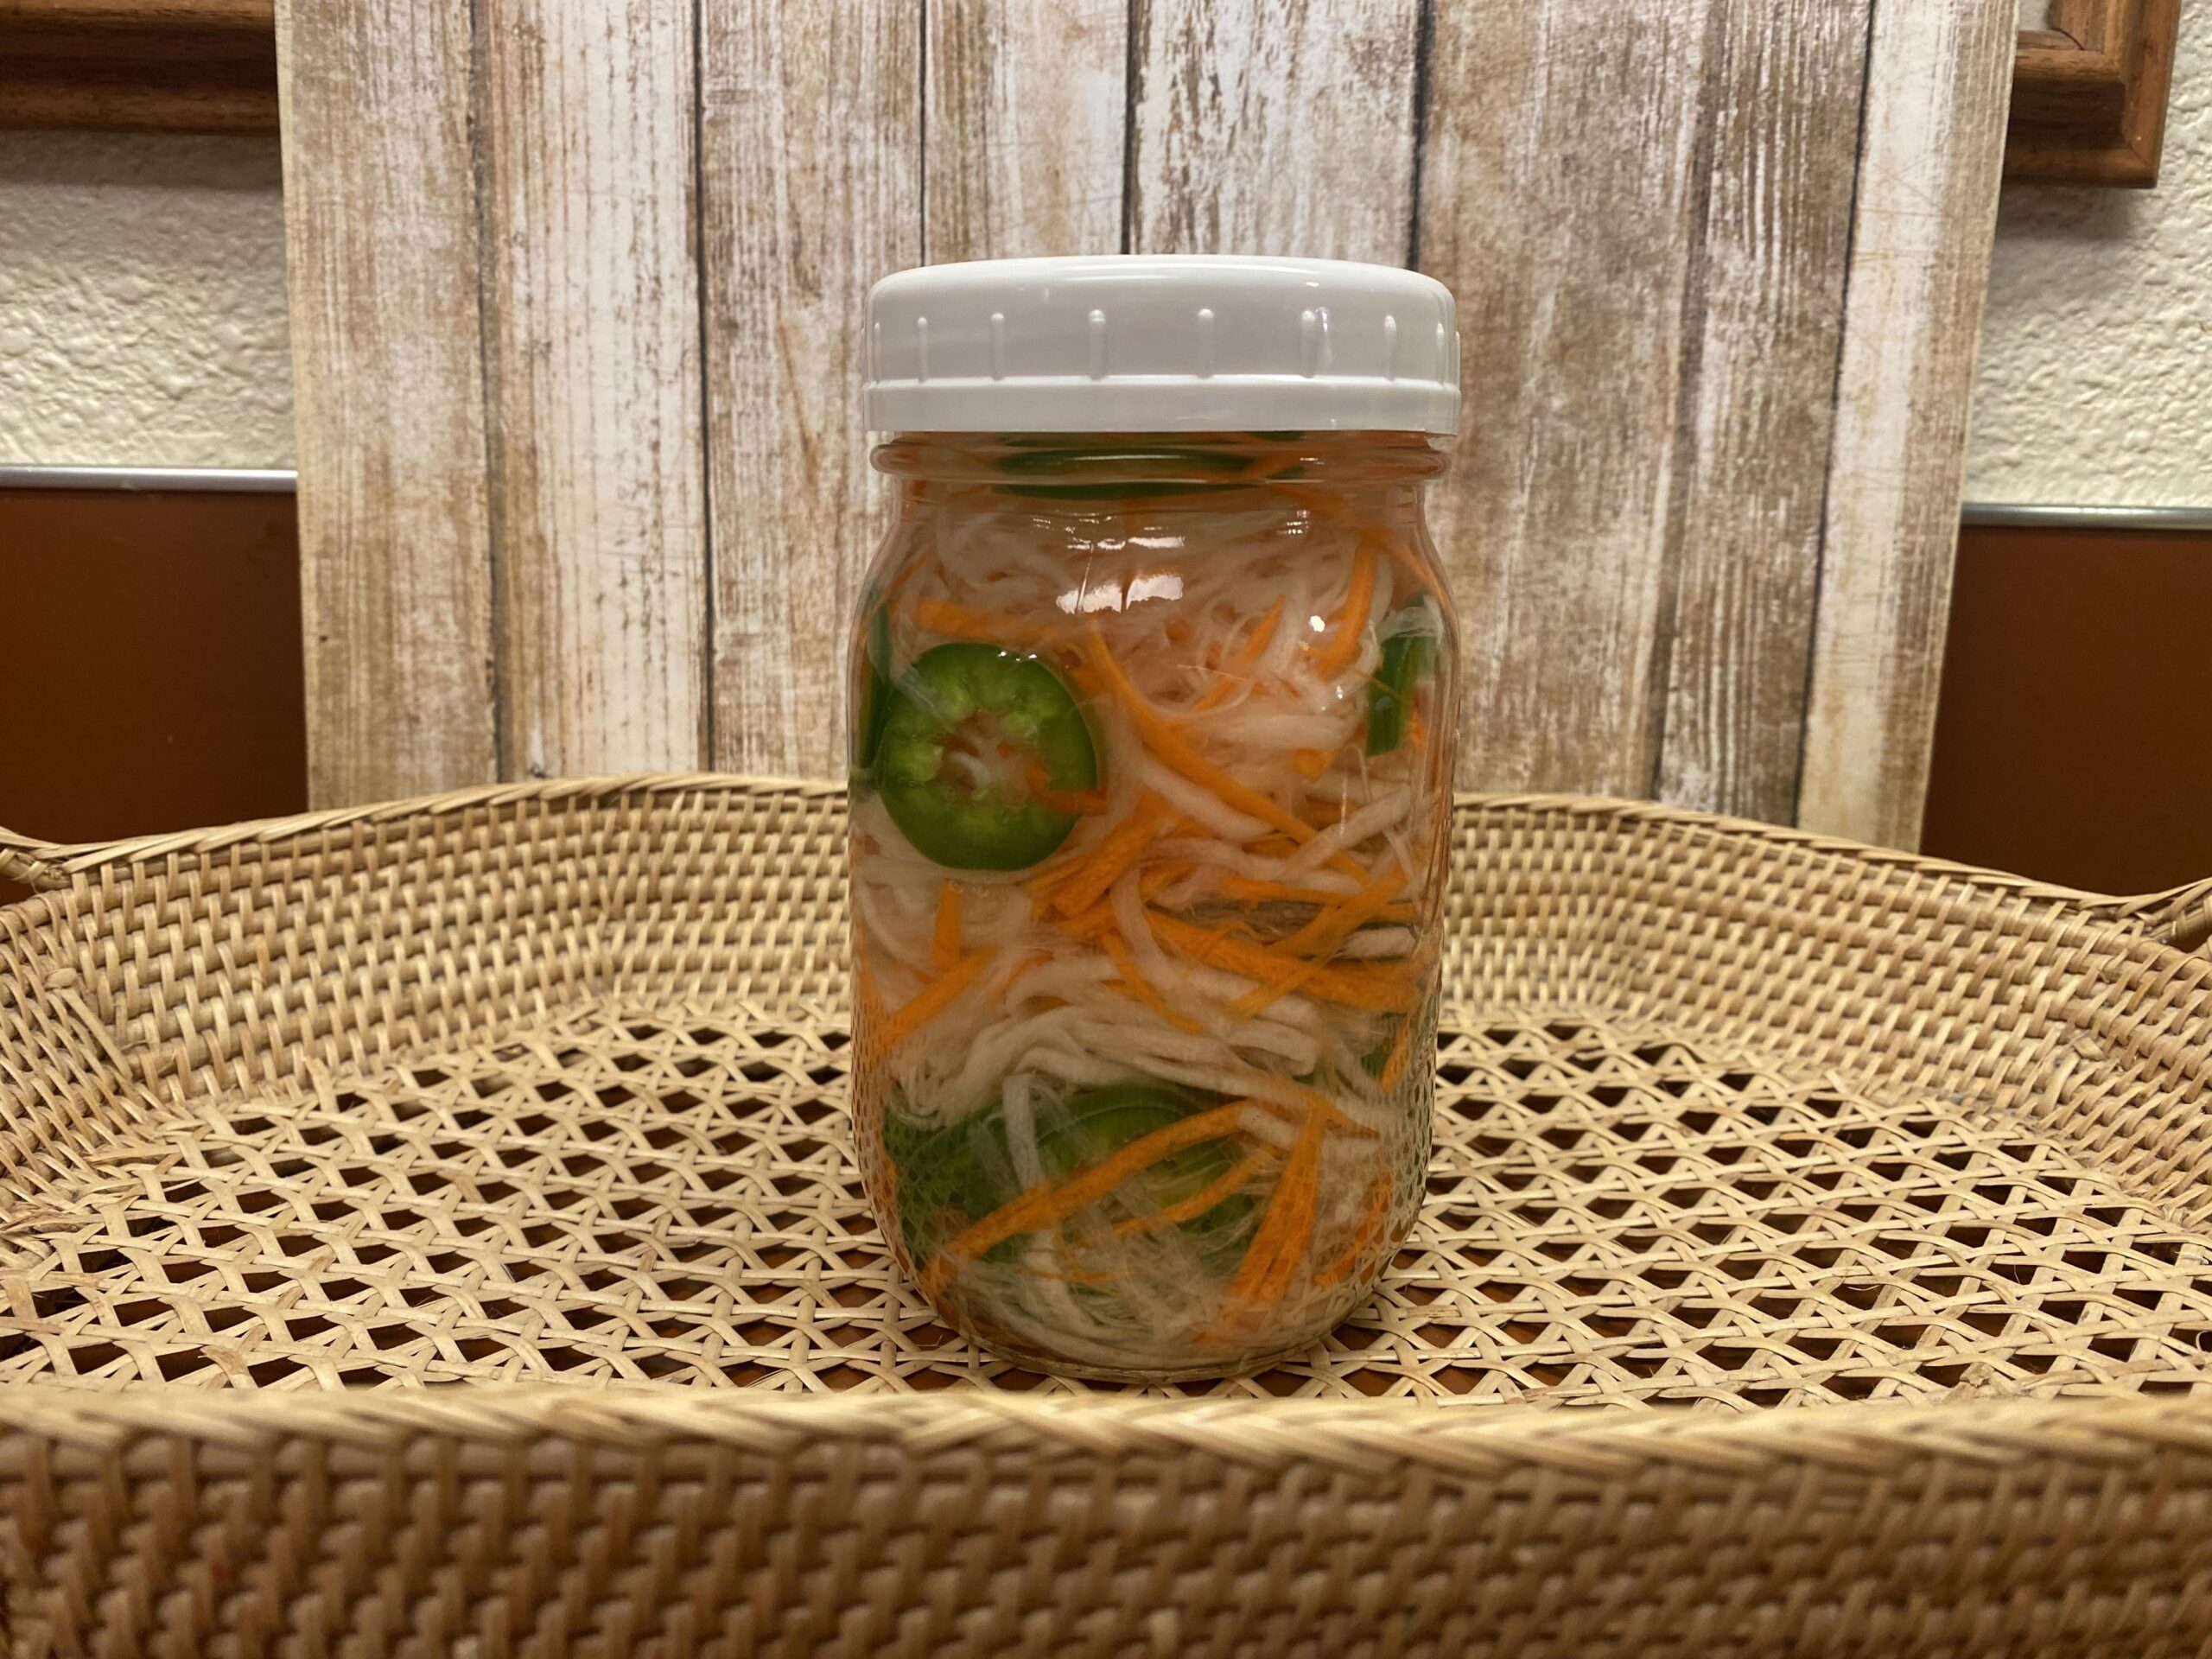  Tangy pickled vegetables to brighten up any meal